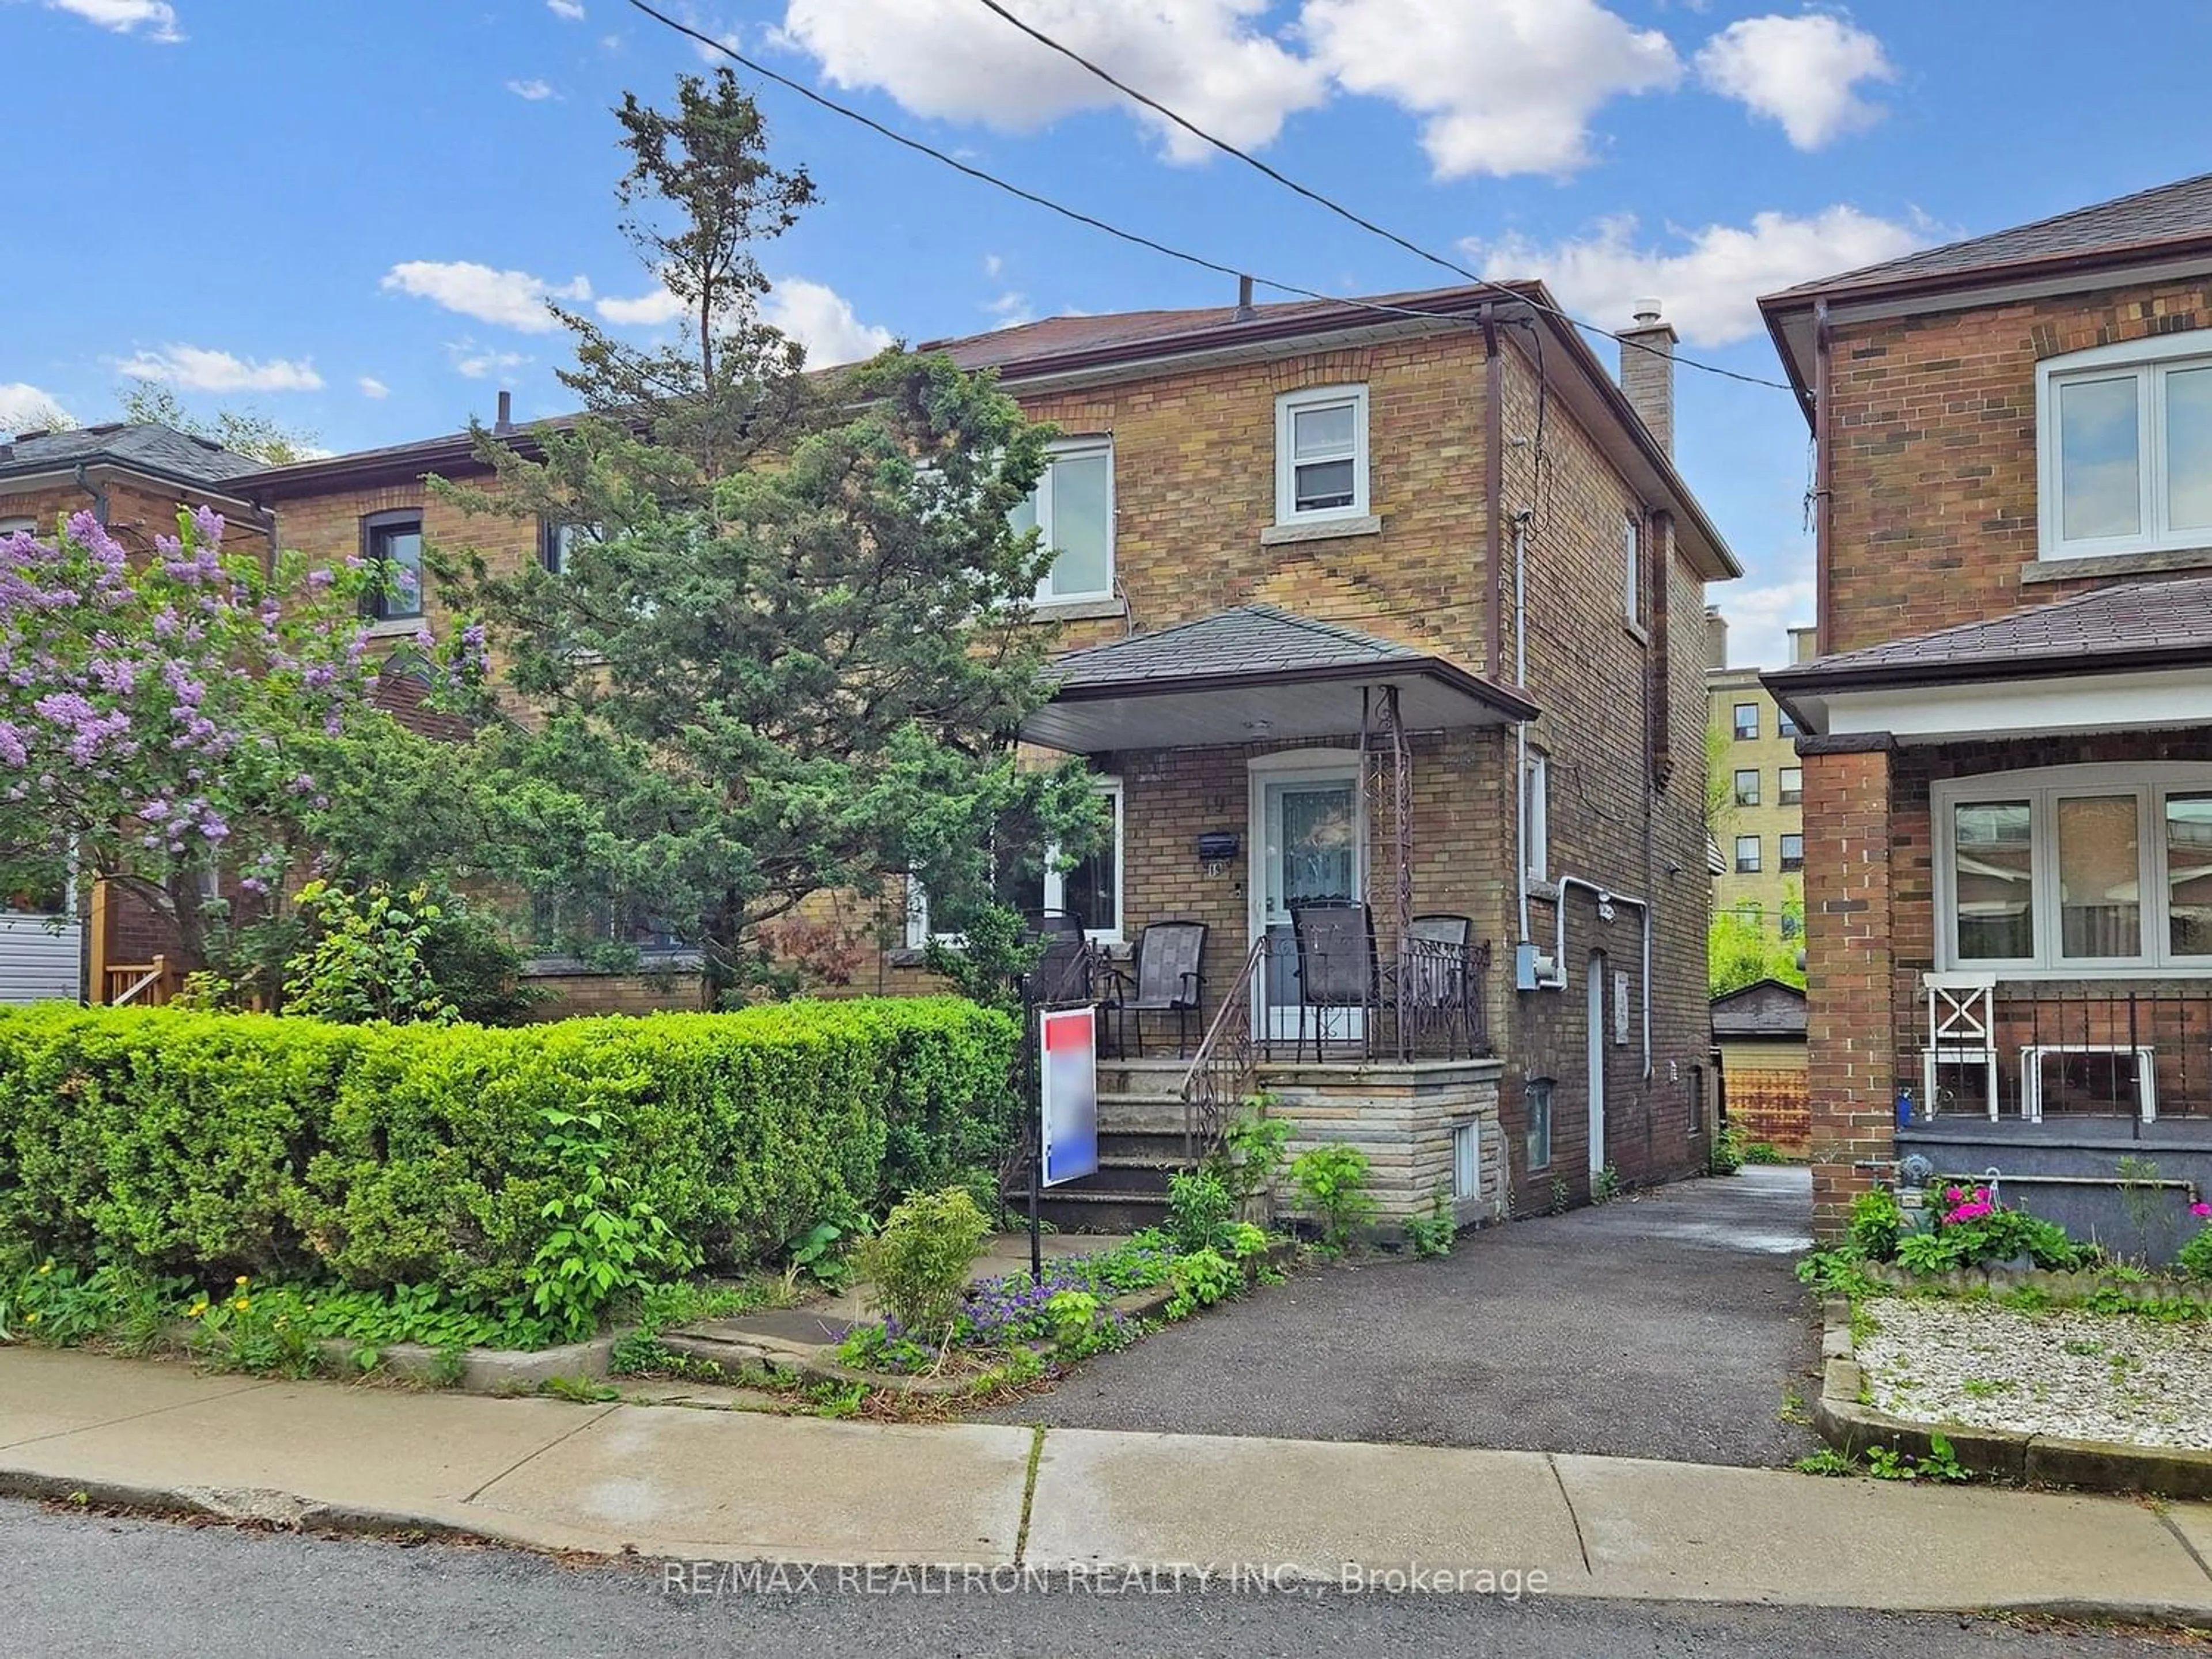 A pic from exterior of the house or condo for 19 Moir Ave, Toronto Ontario M6C 1N6